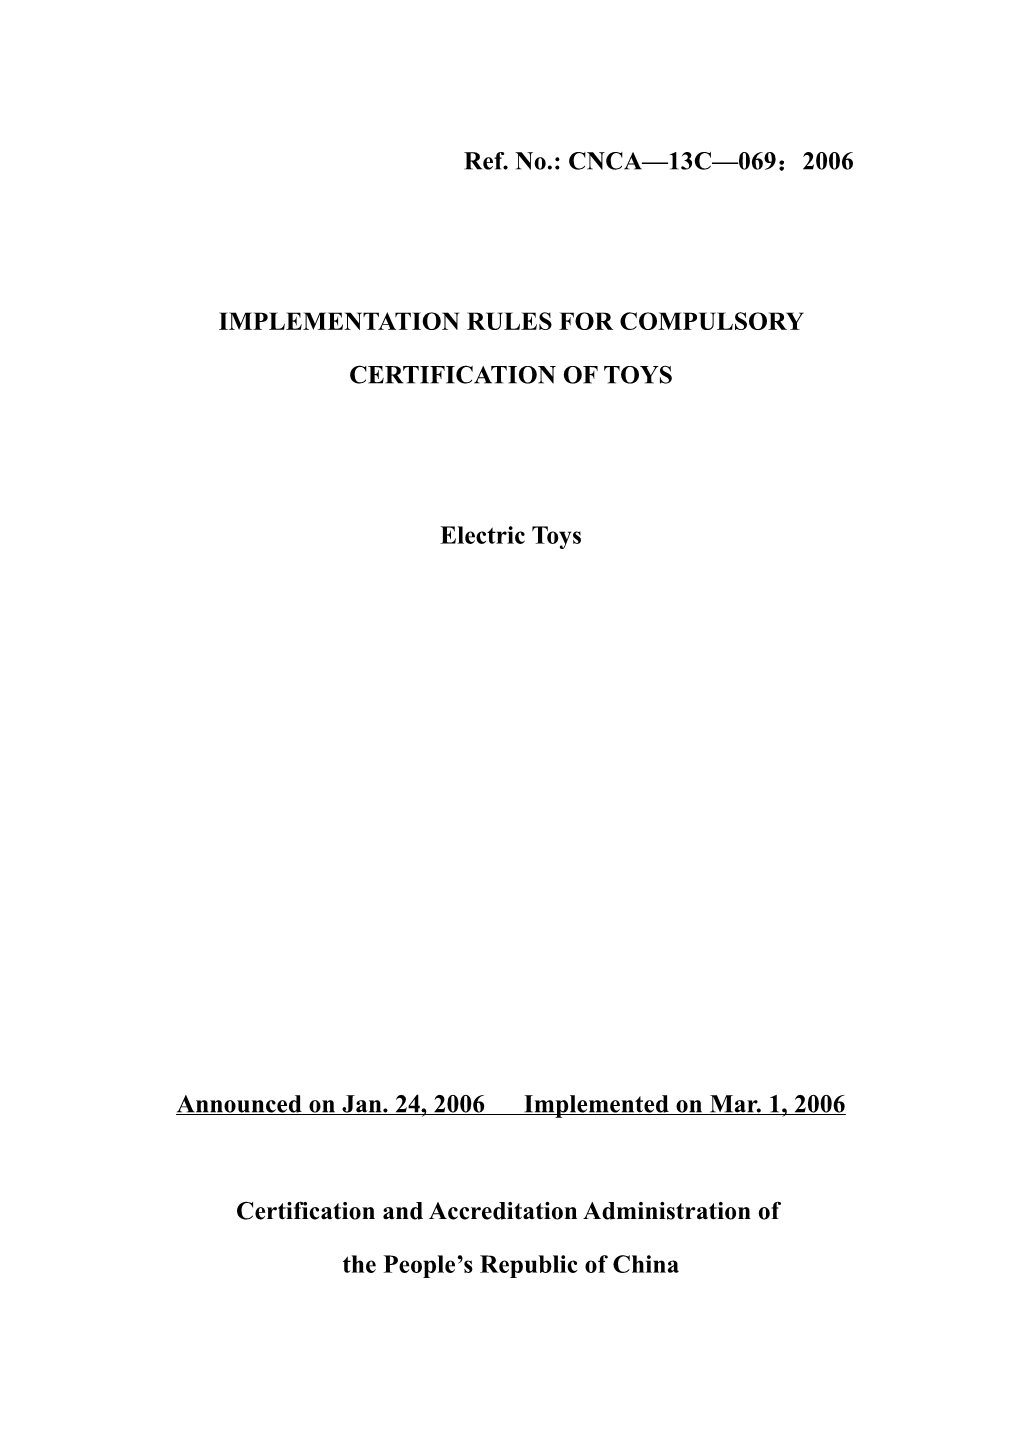 Implementation Rules for Compulsory Certification of Toys